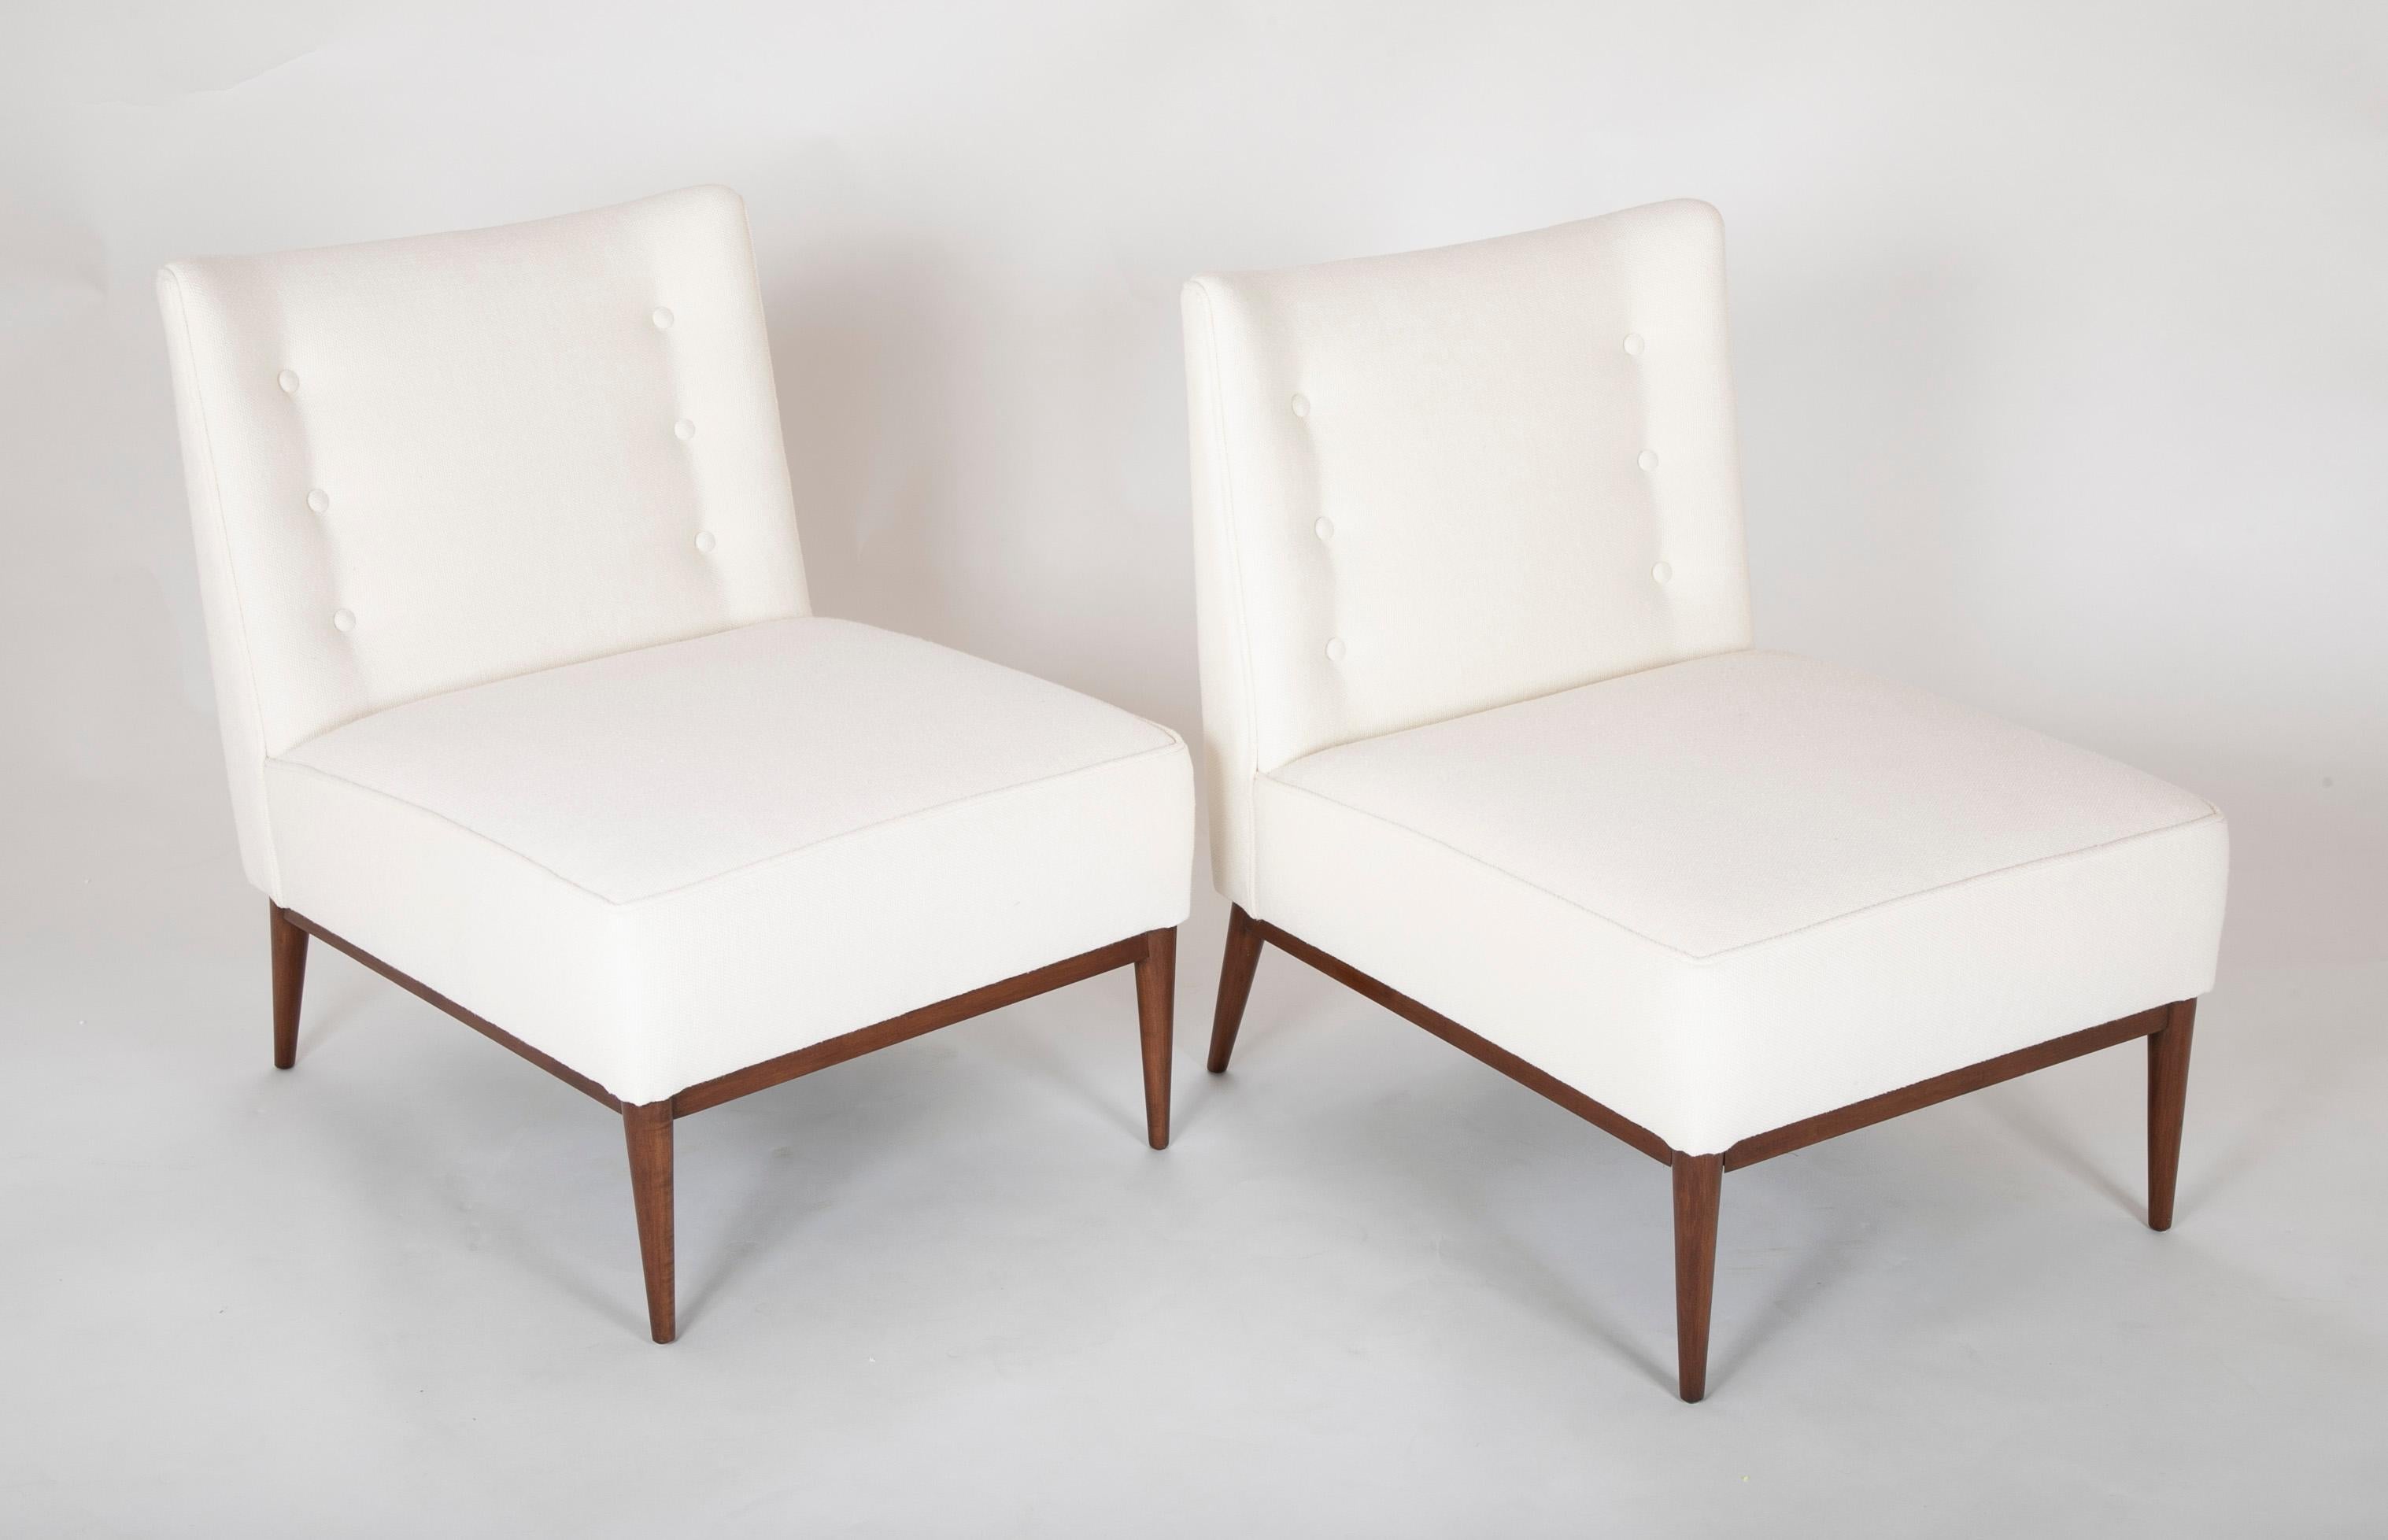 A pair of slipper chairs designed by Paul McCobb. Upholstered in Rogers & Goffigon fabric. Lounge chair, model 300 produced by Custom Craft, Inc. USA, 1952 Mahogany

literature: Directional Designs: Paul McCobb, manufacturer's catalog, pg. 82.